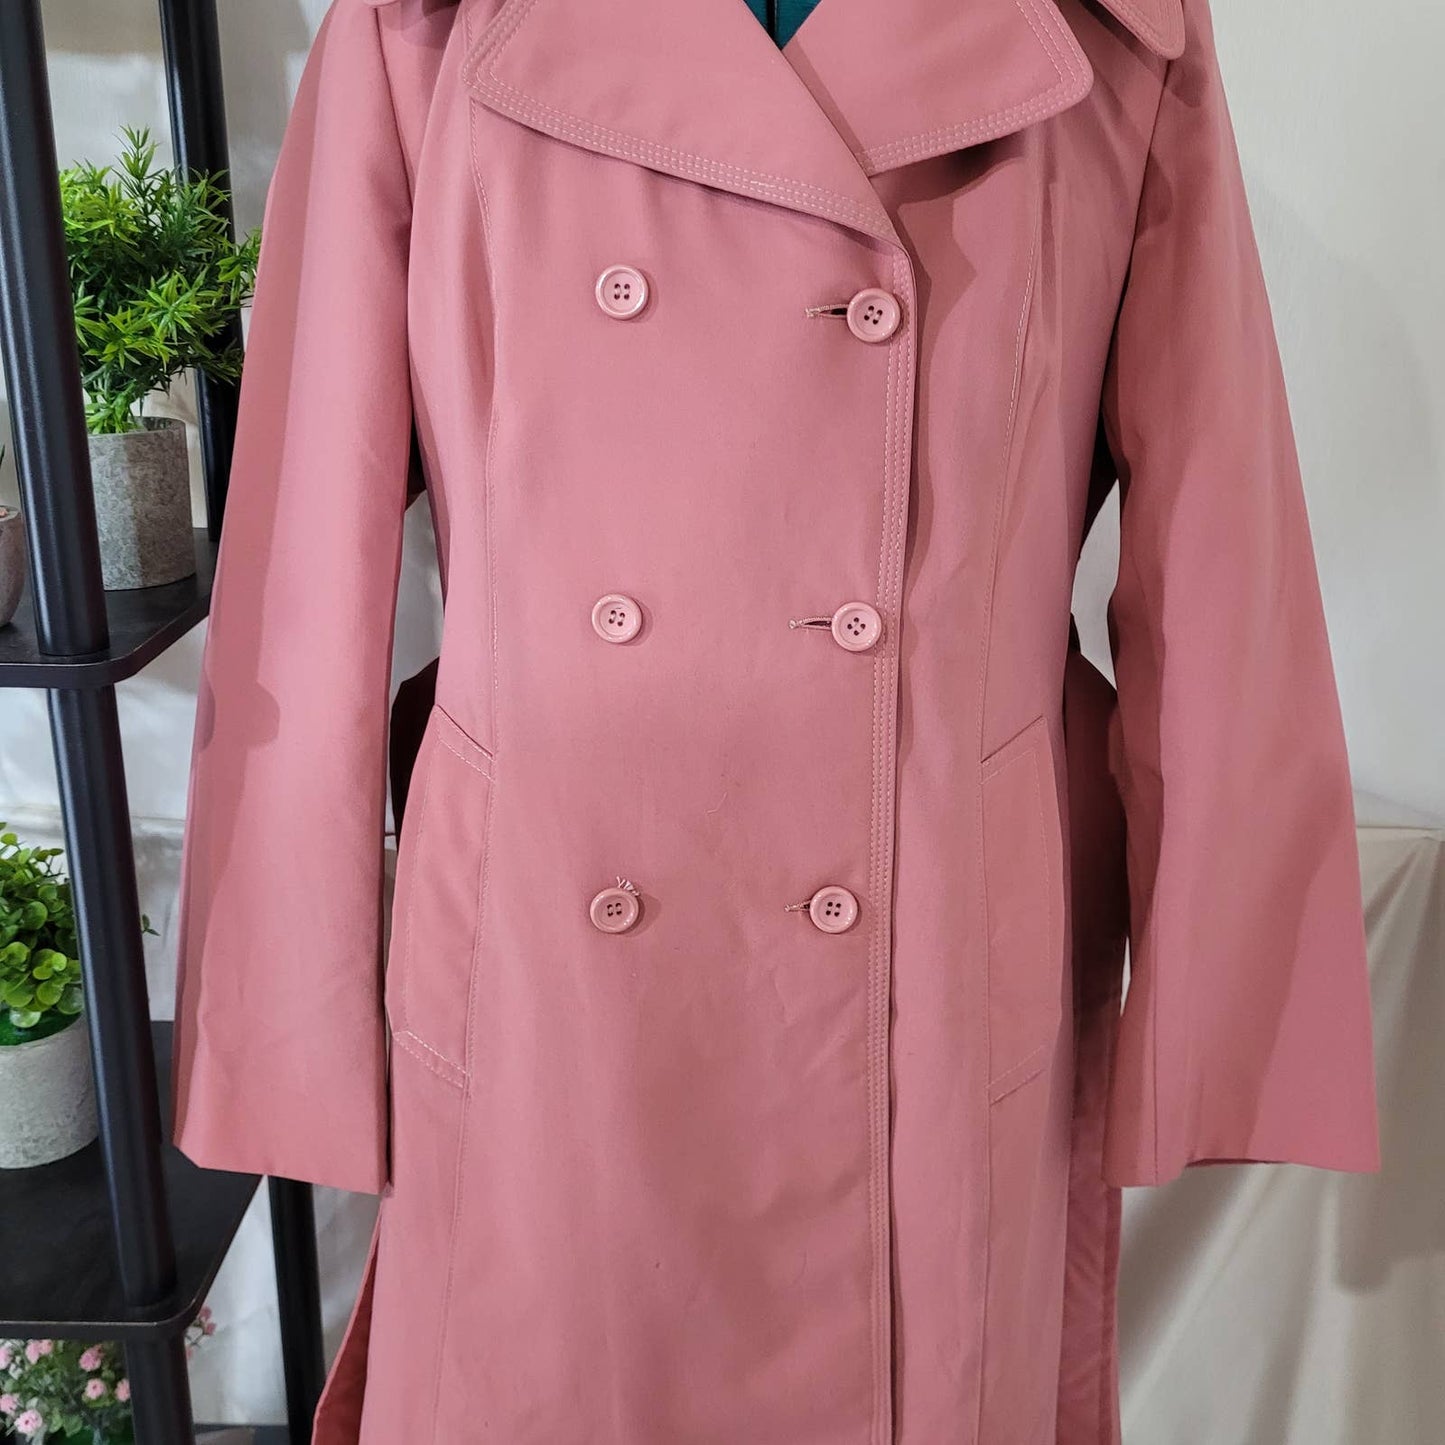 Vintage 1960s 1070s Betty Barclay Pink Trench Coat with Removable Hood - Medium